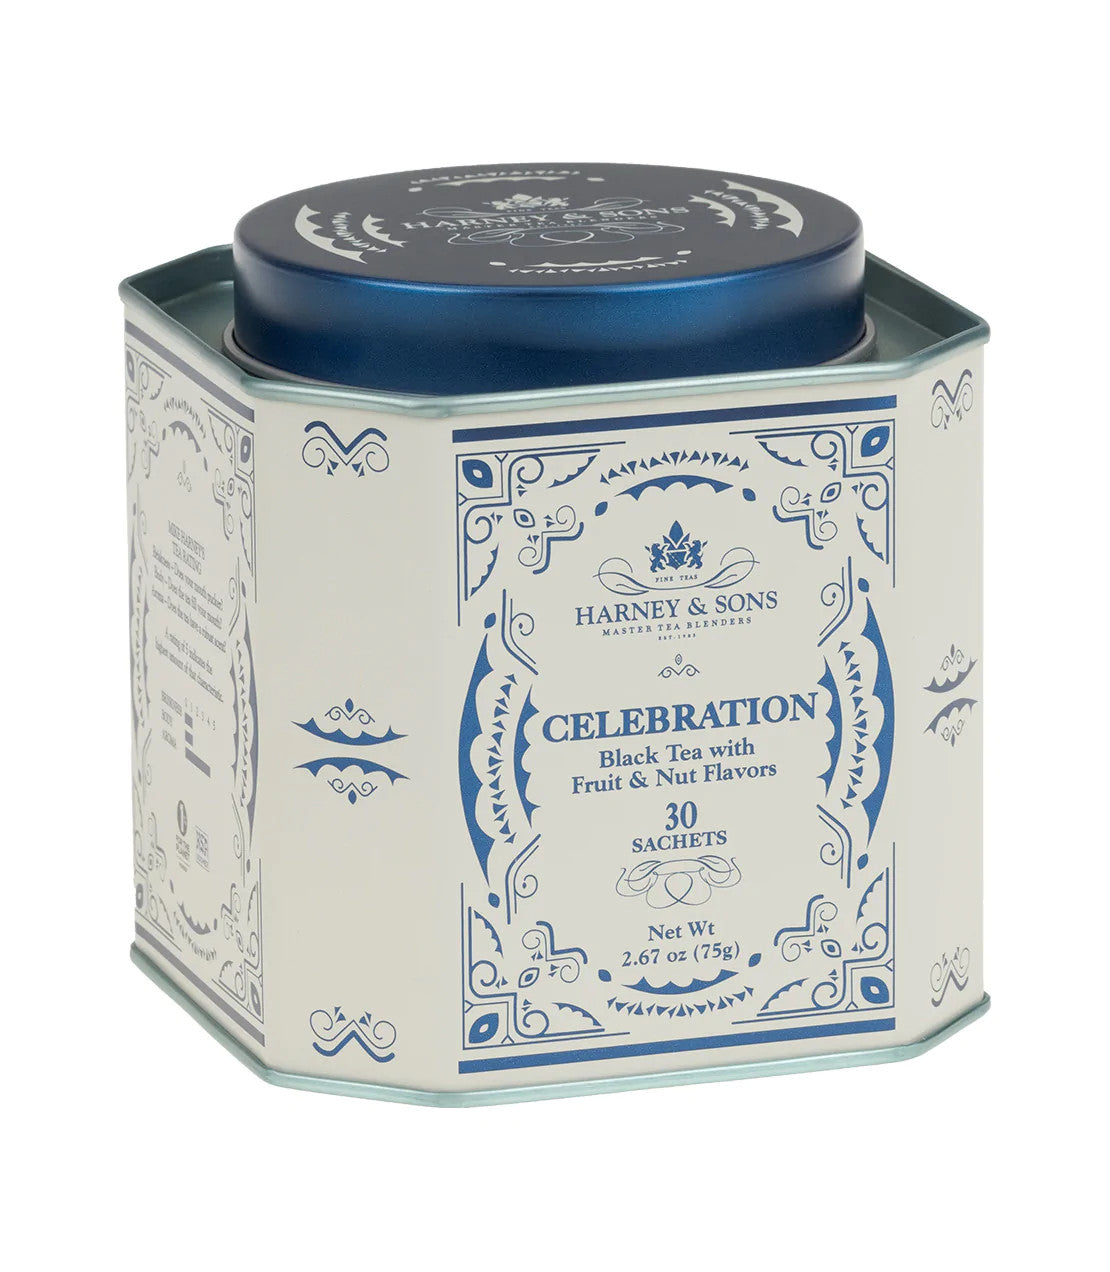 Holiday Celebration Tea by Harney & Sons.